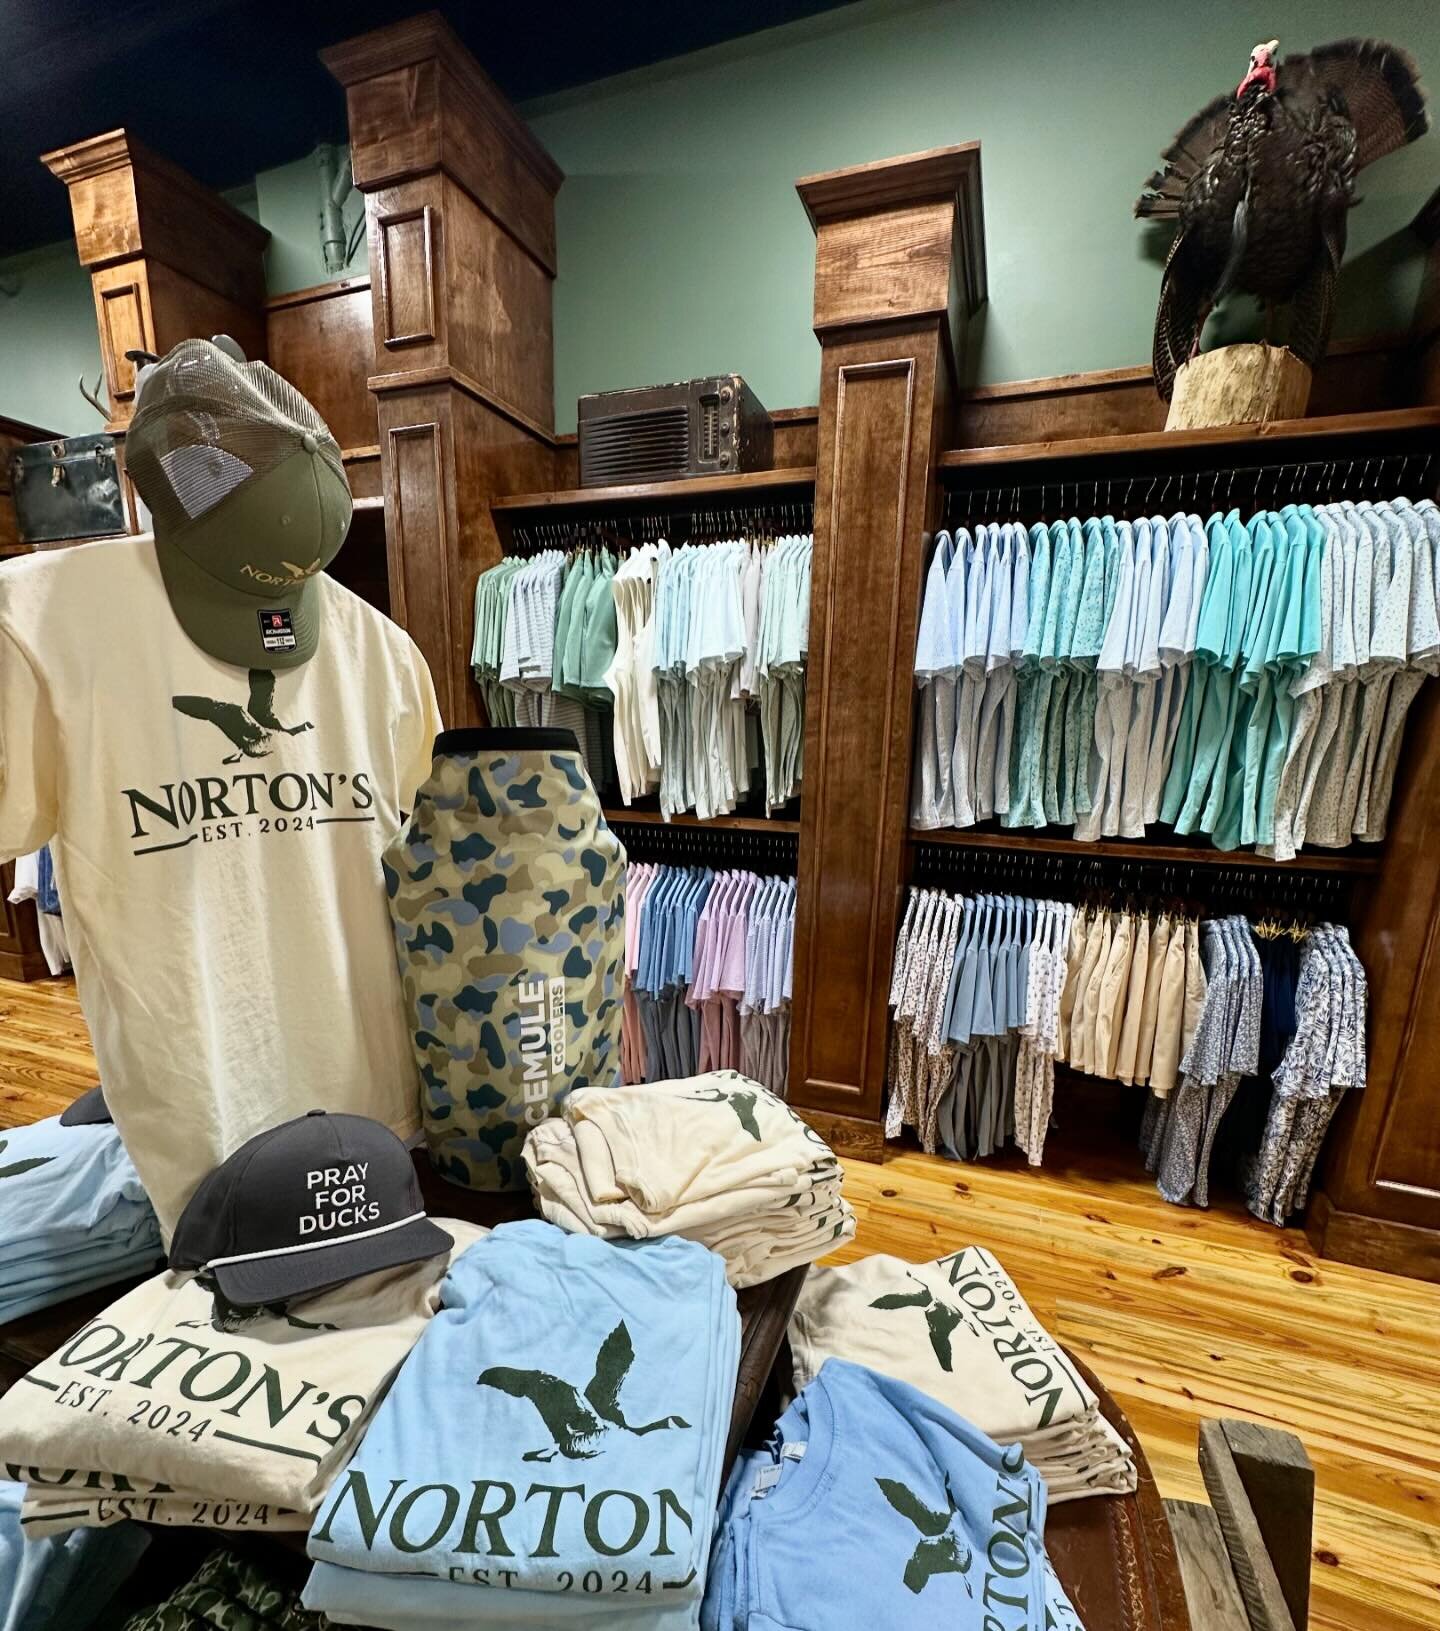 Tomorrow is the day&hellip;. Stop by Norton&rsquo;s for their Grand Opening from 4:00-7:00pm! ✨🦆